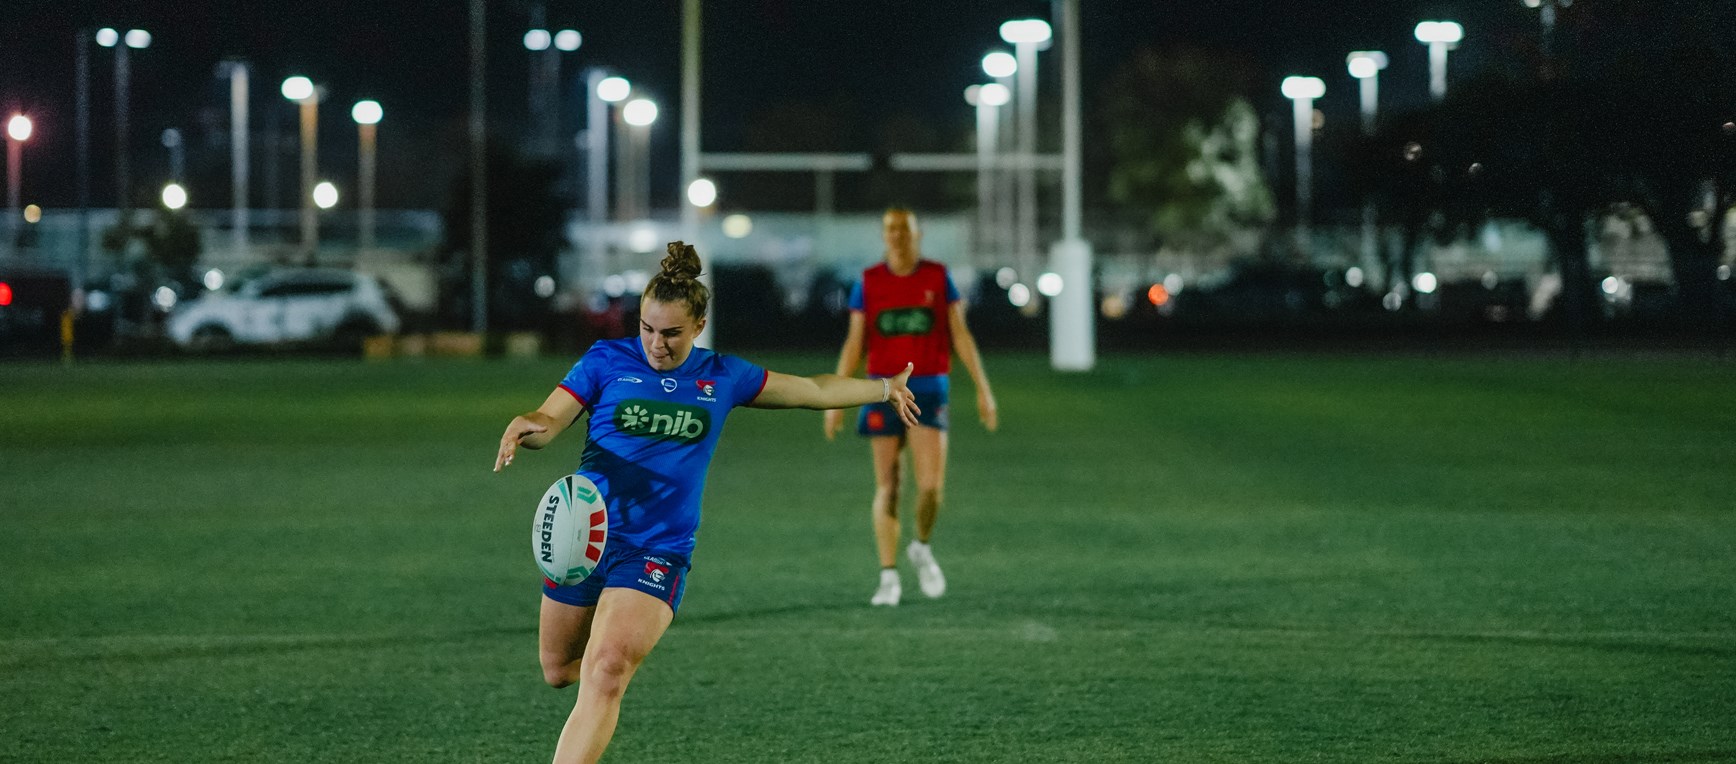 Gallery: NRLW side prepare for opening round